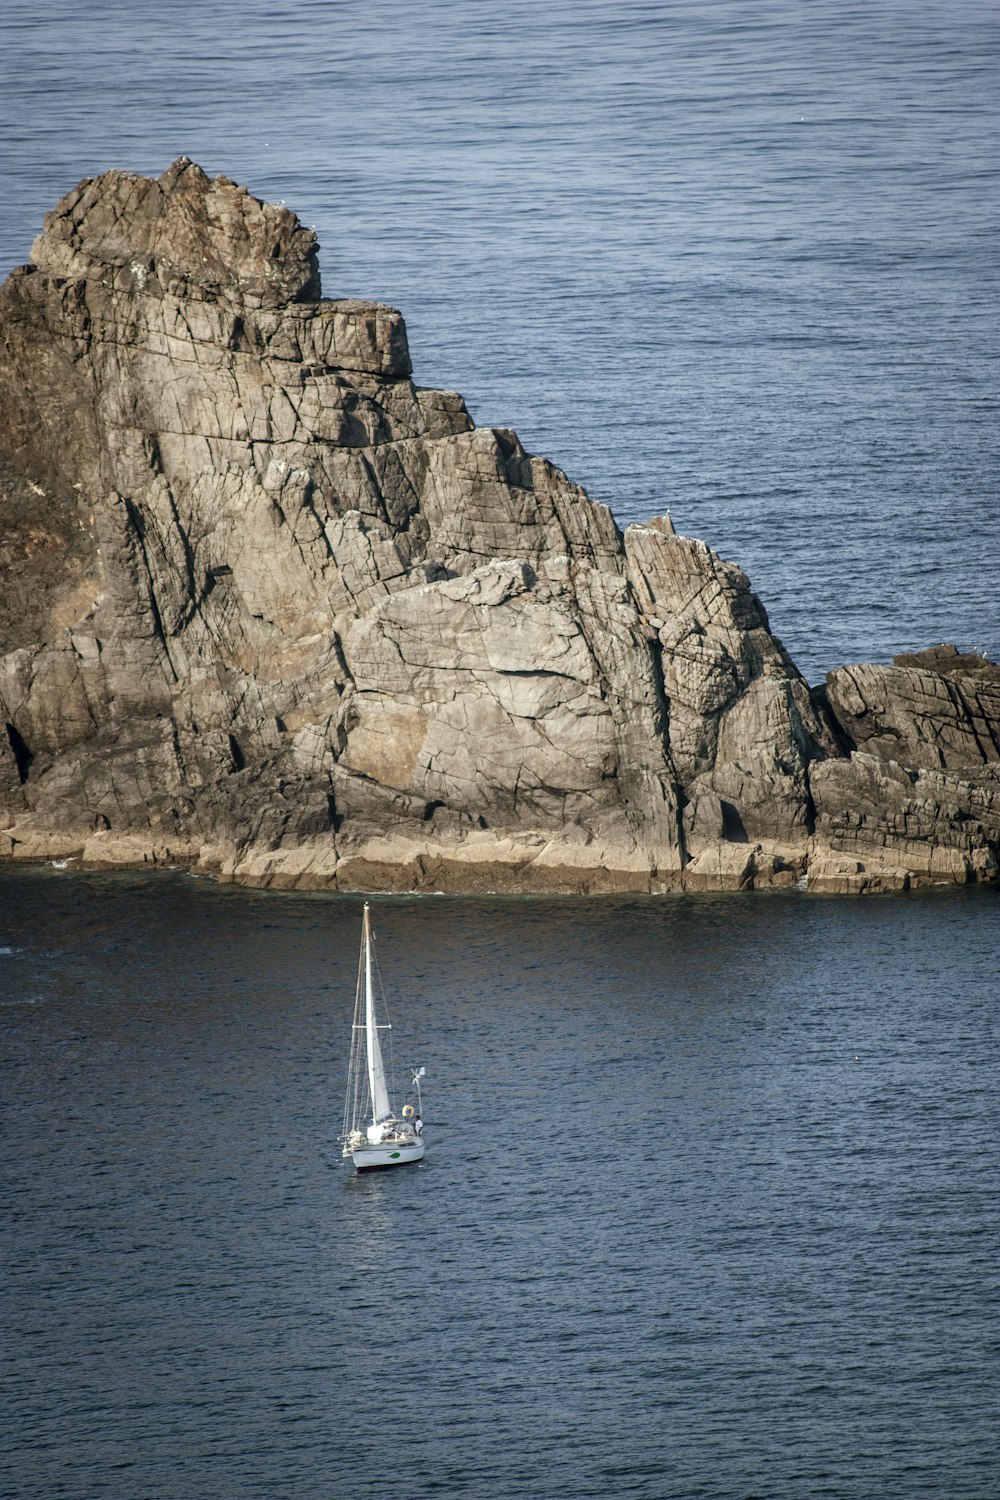 a sailboat in a body of water near a large rock